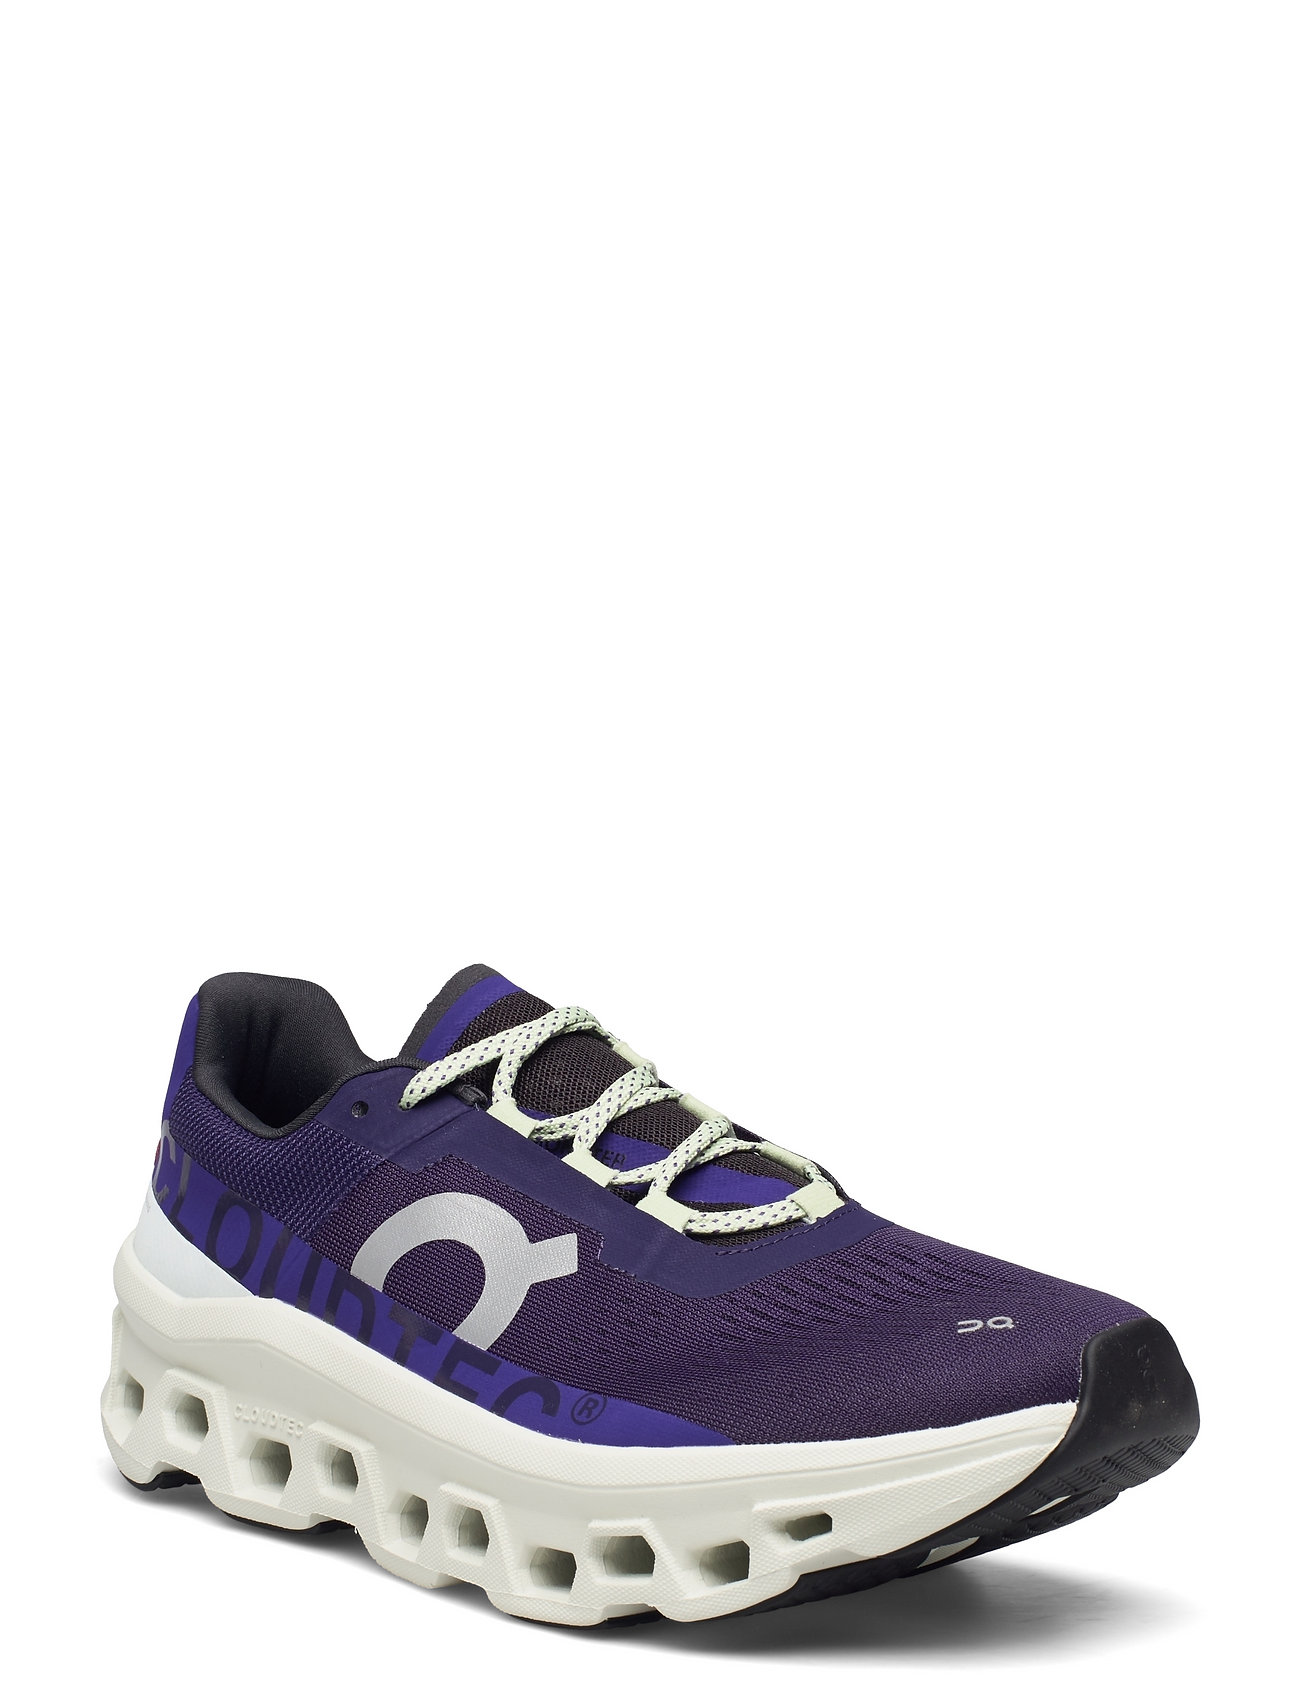 Cloudmonster Shoes Sport Shoes Running Shoes Lila On